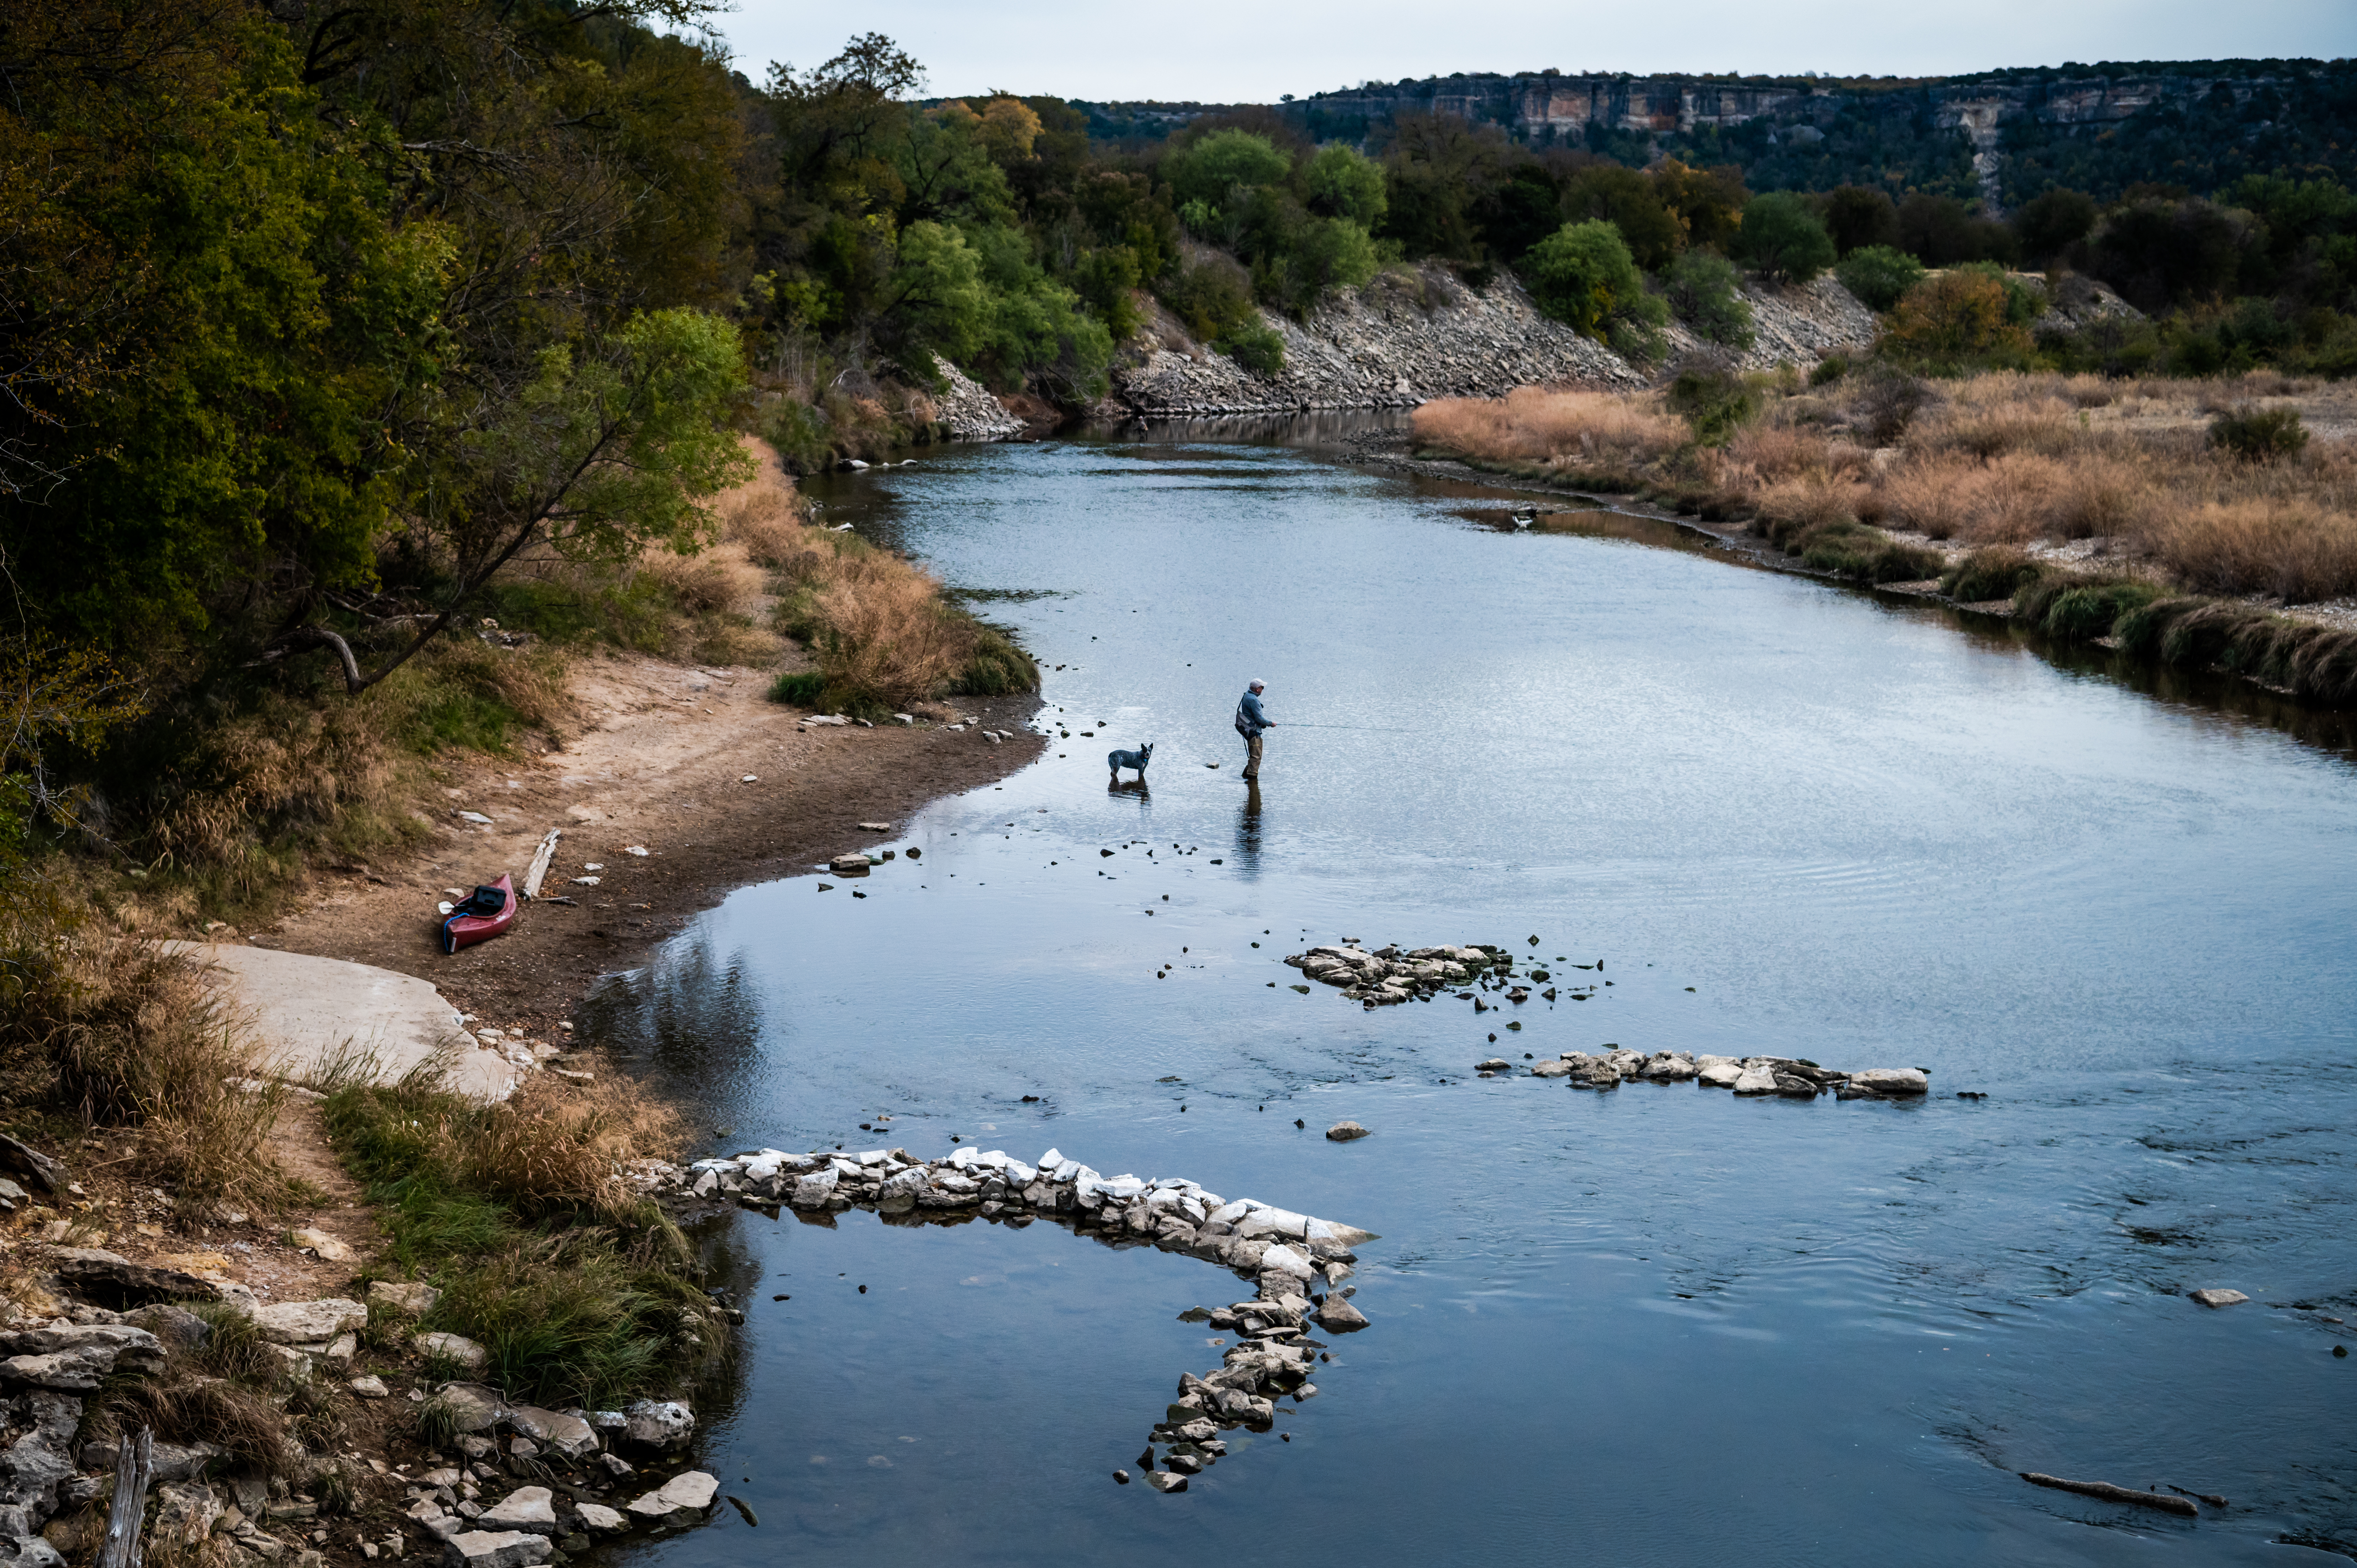 A man fly fishing with his dog in the Brazos River, surrounded by tall forested hills covered in scrubby trees. 